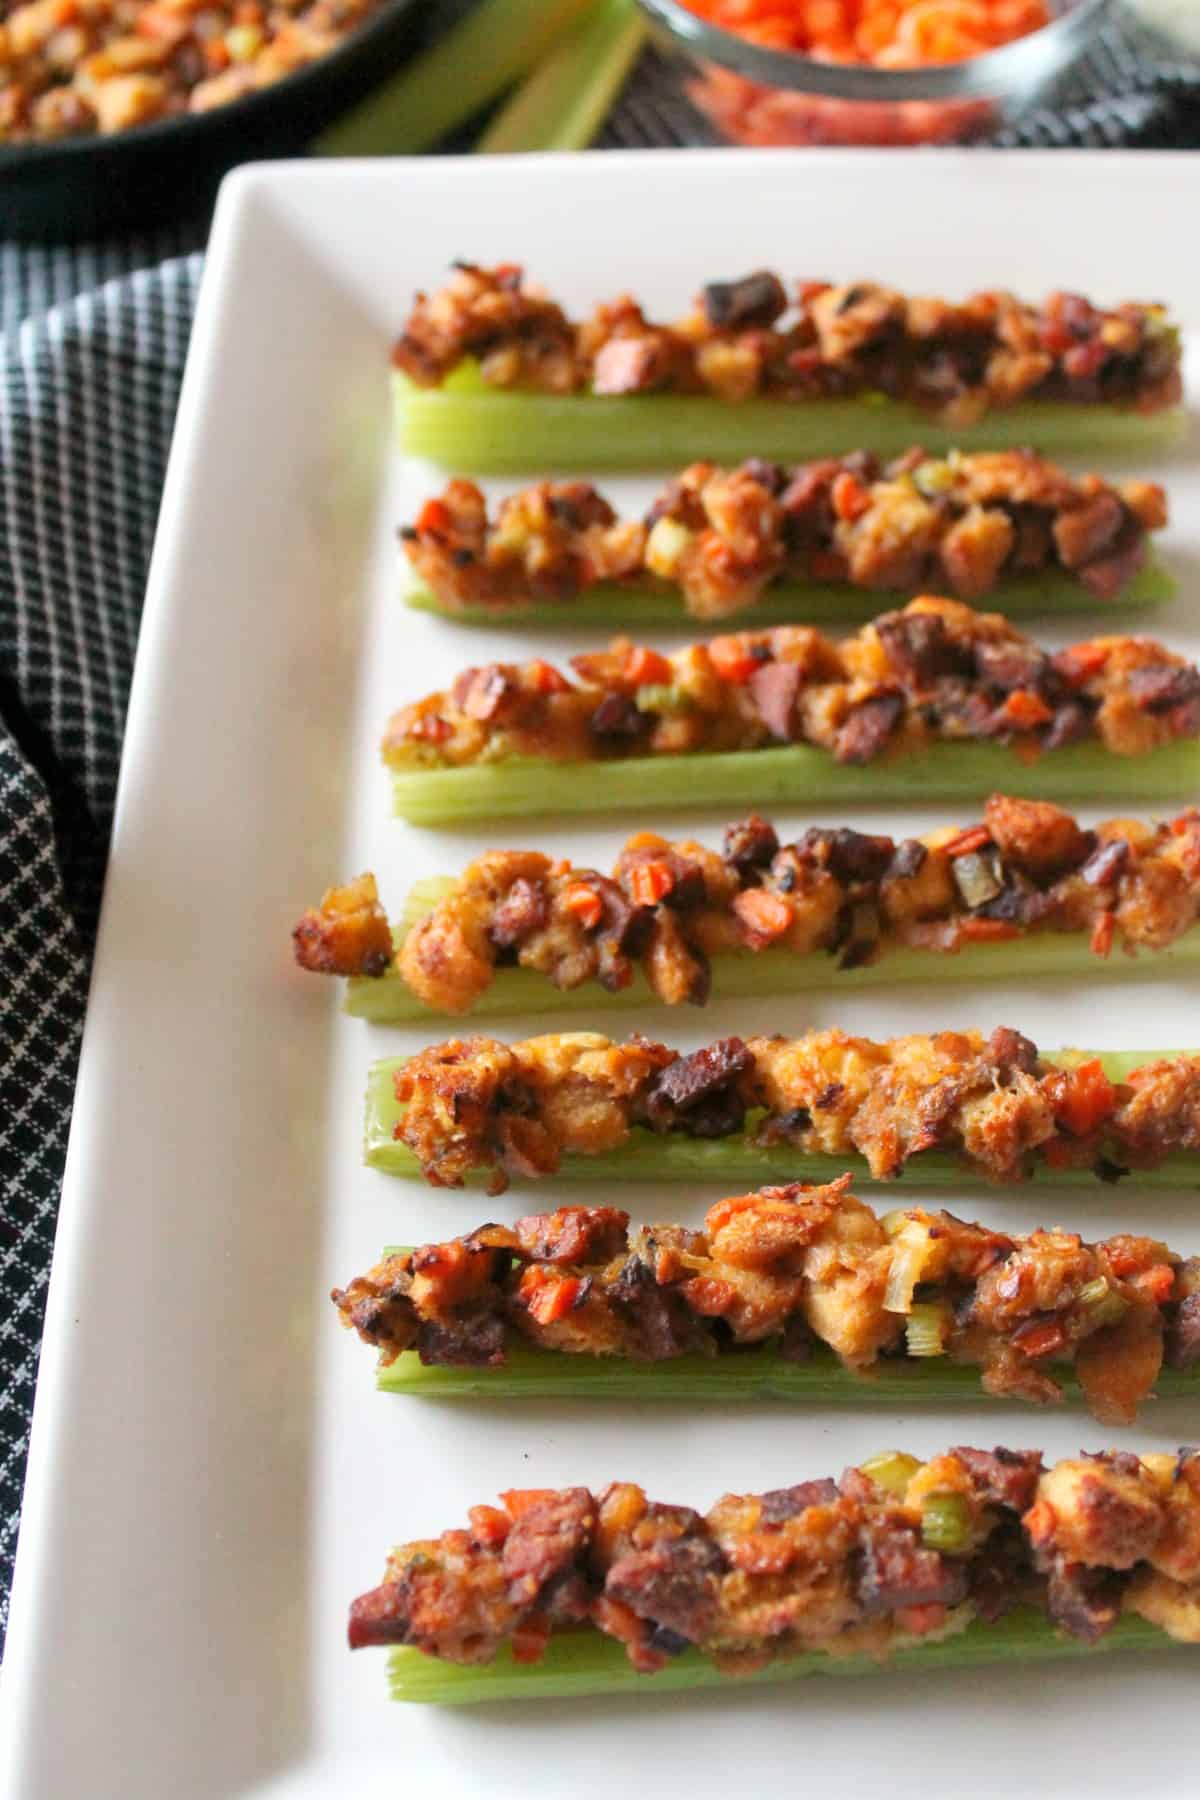 These roasted celery boats with cajun dressing are a perfect light appetizer to serve at a holiday party